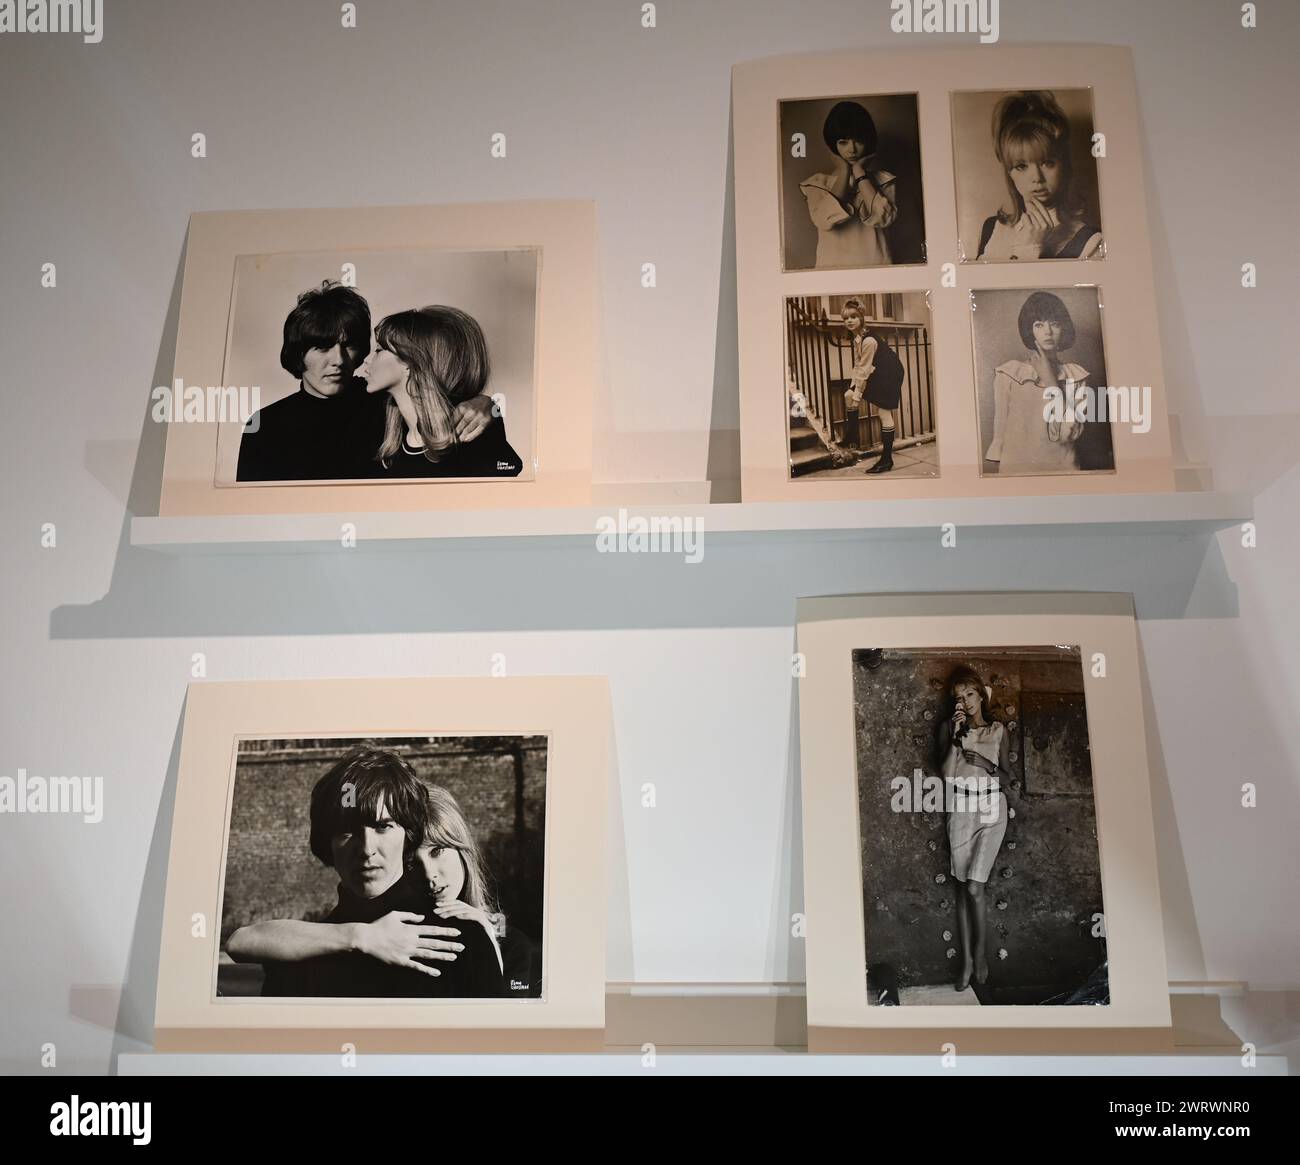 Providing a remarkable window into the private world of the celebrated model, muse, photographer and icon, The Pattie Boyd Collection will be offered by Christie’s online from 8 to 22 March with all 111 lots open for browsing from 26 February. A four-time Vogue cover-girl, Boyd is widely regarded as rock’s most legendary muse – as the former wife of both George Harrison and Eric Clapton, she inspired some of the greatest love songs of all time. The sale is led by the original artwork chosen by Eric Clapton for the cover of Derek and The Dominos 1970 album Layla and Other Assorted Love Songs... Stock Photo